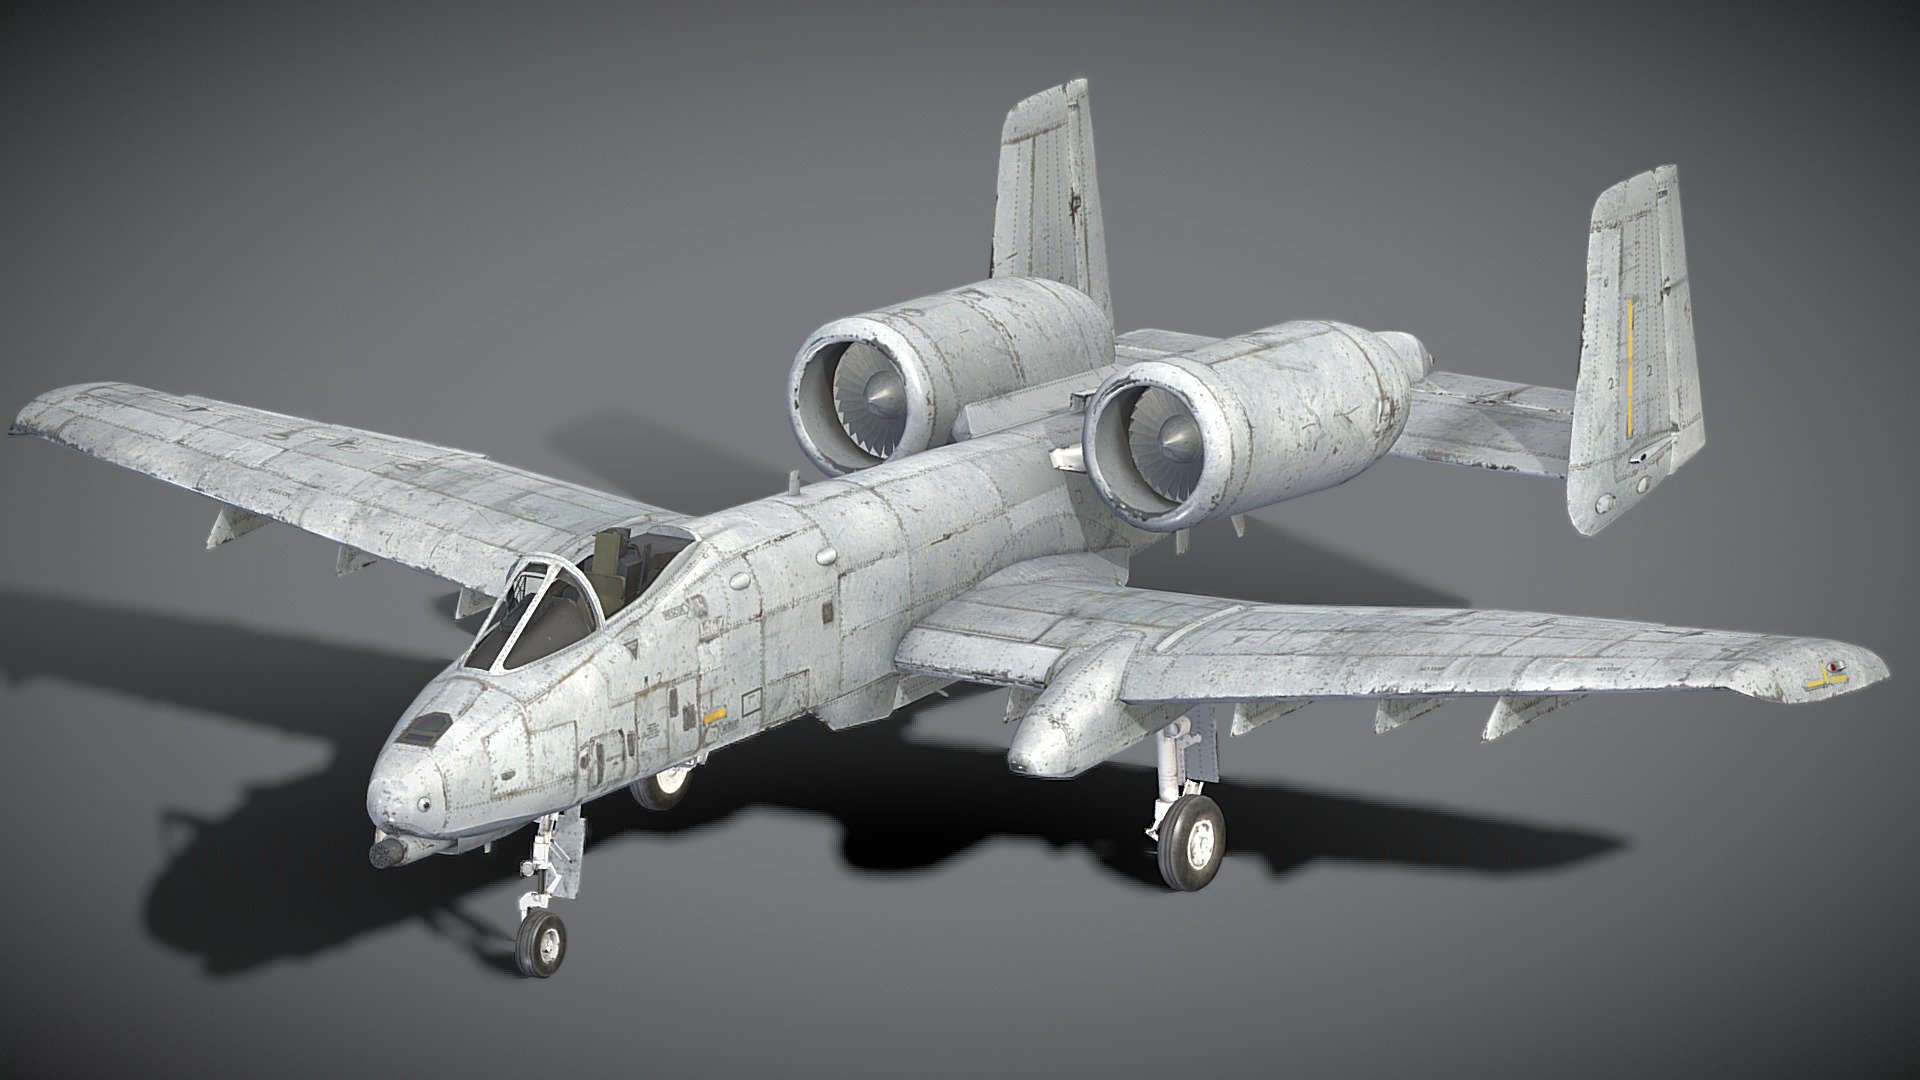 The Fairchild Republic A-10 Thunderbolt II is a single-seat, twin-turbofan, straight-wing, subsonic attack aircraft developed by Fairchild Republic for the United States Air Force (USAF). In service since 1976, it is named for the Republic P-47 Thunderbolt, but is commonly referred to as the &ldquo;Warthog